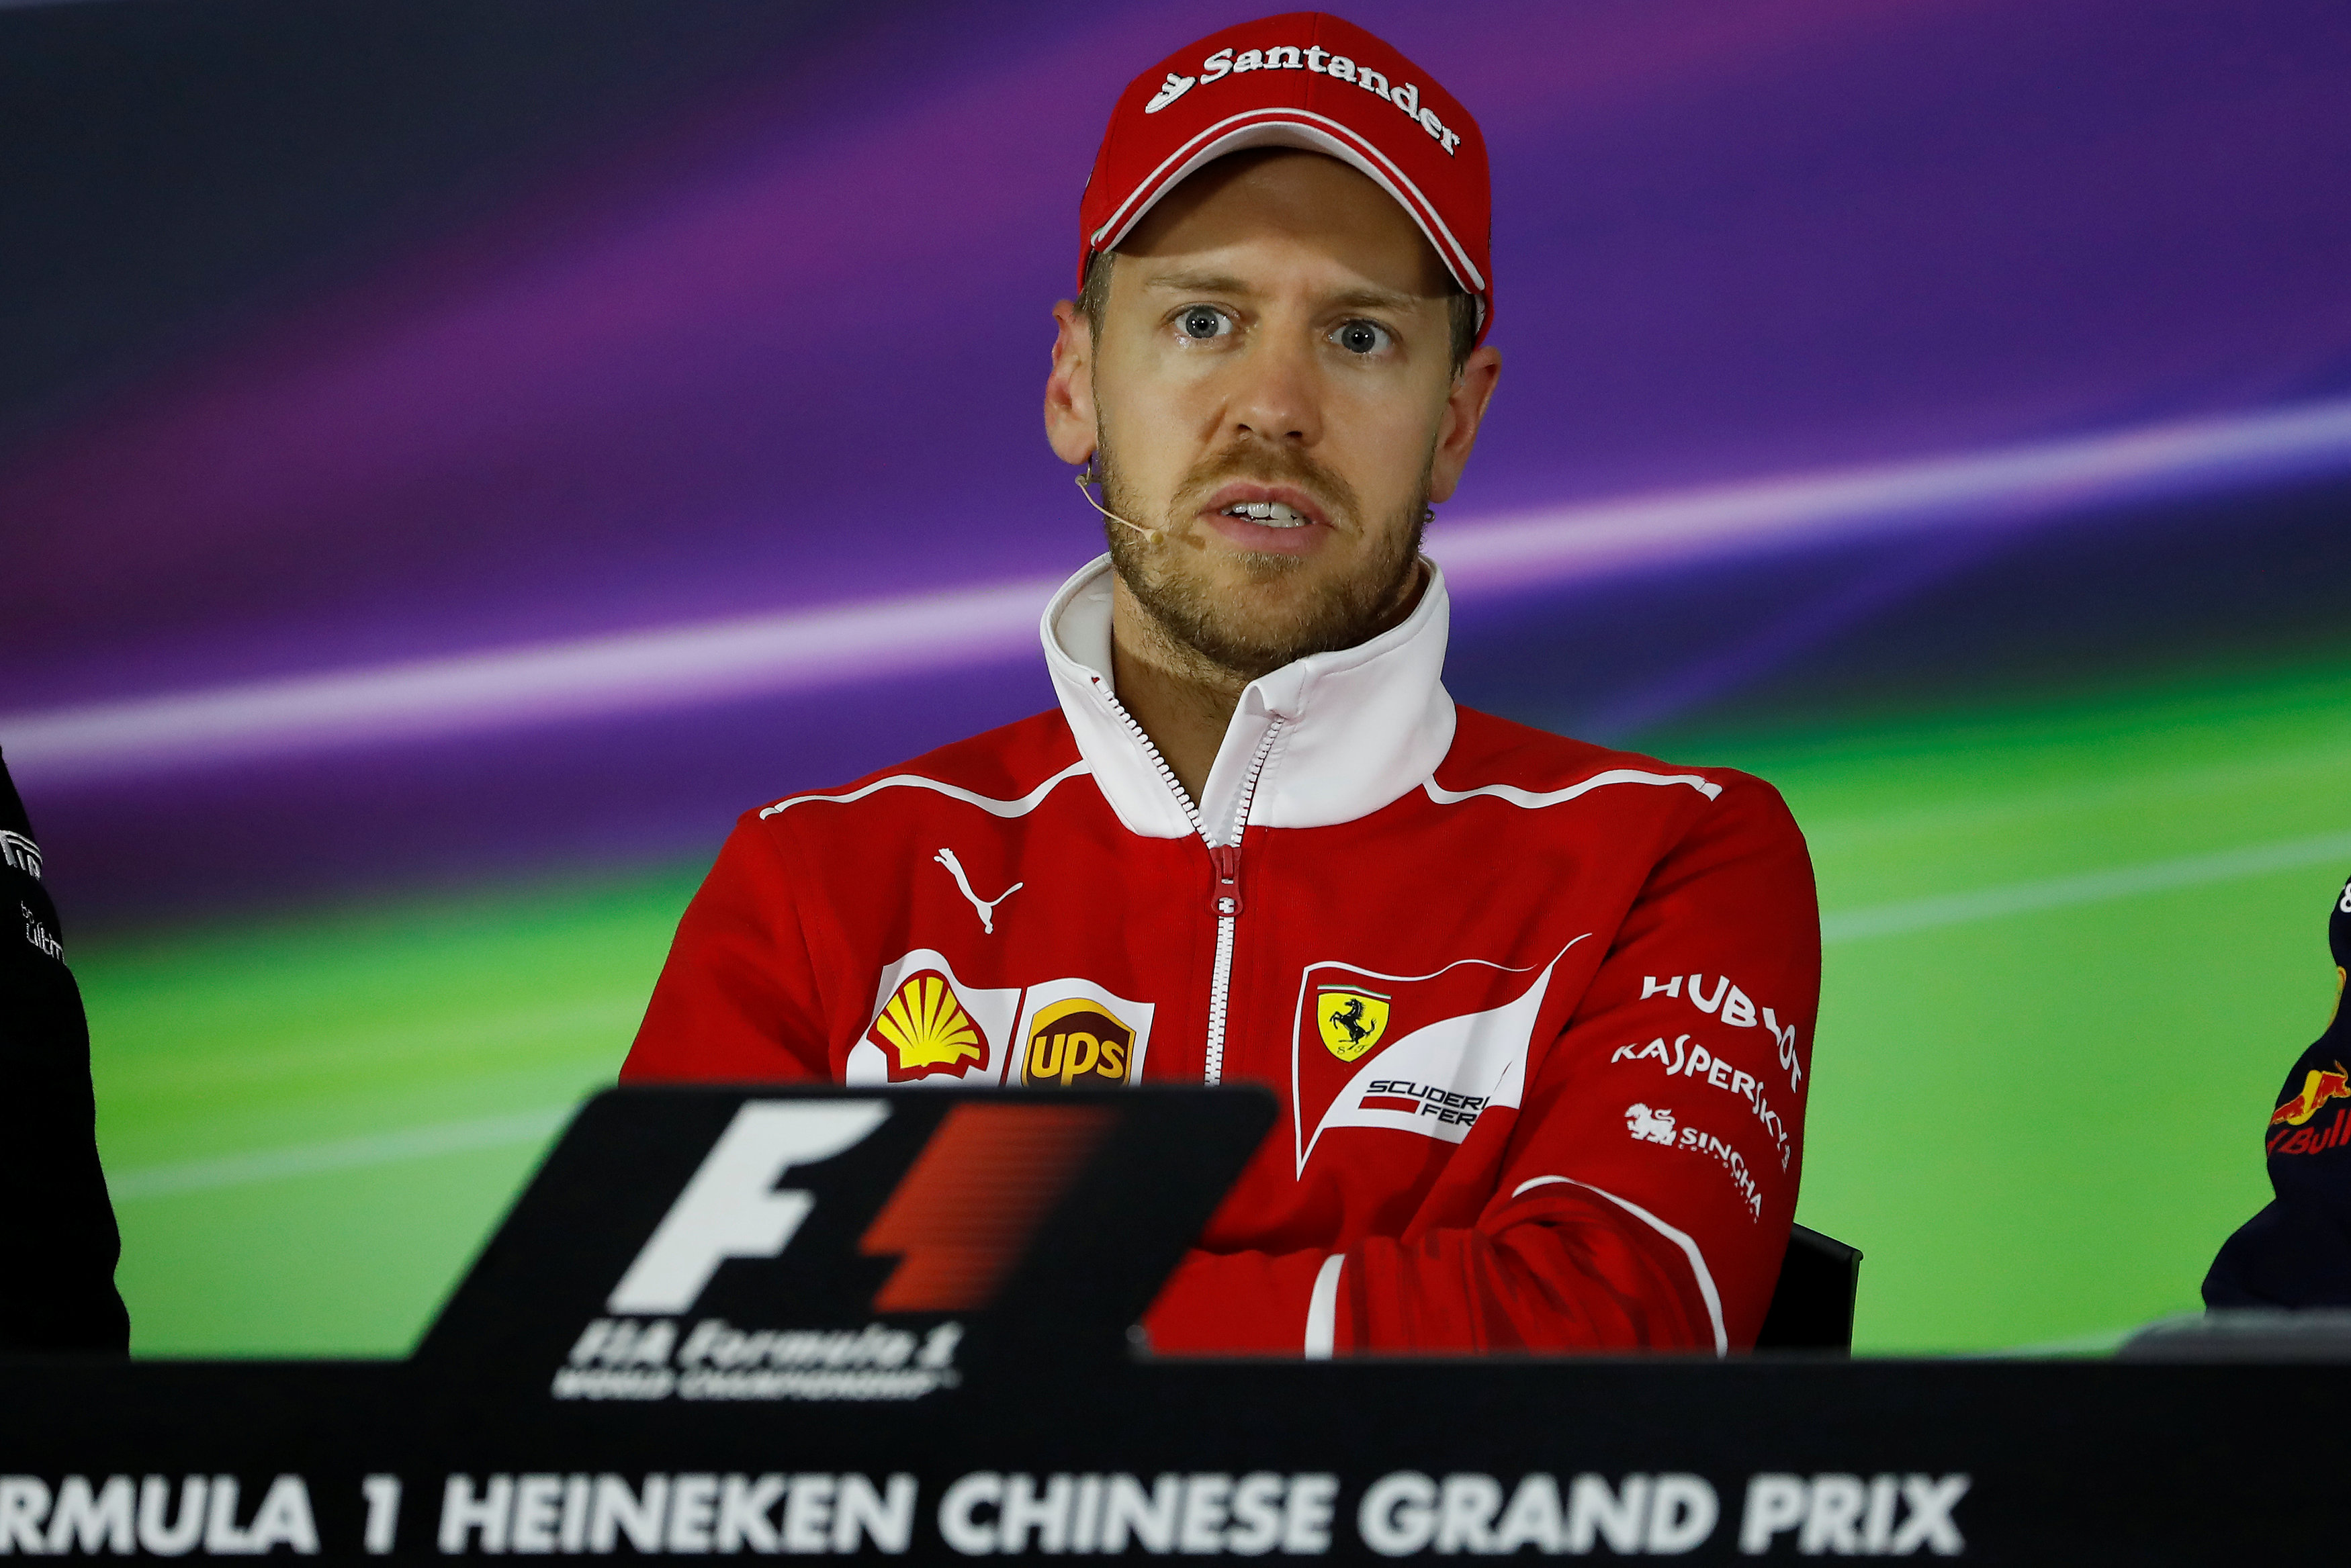 Vettel sets scorching pace in final Chinese GP practice